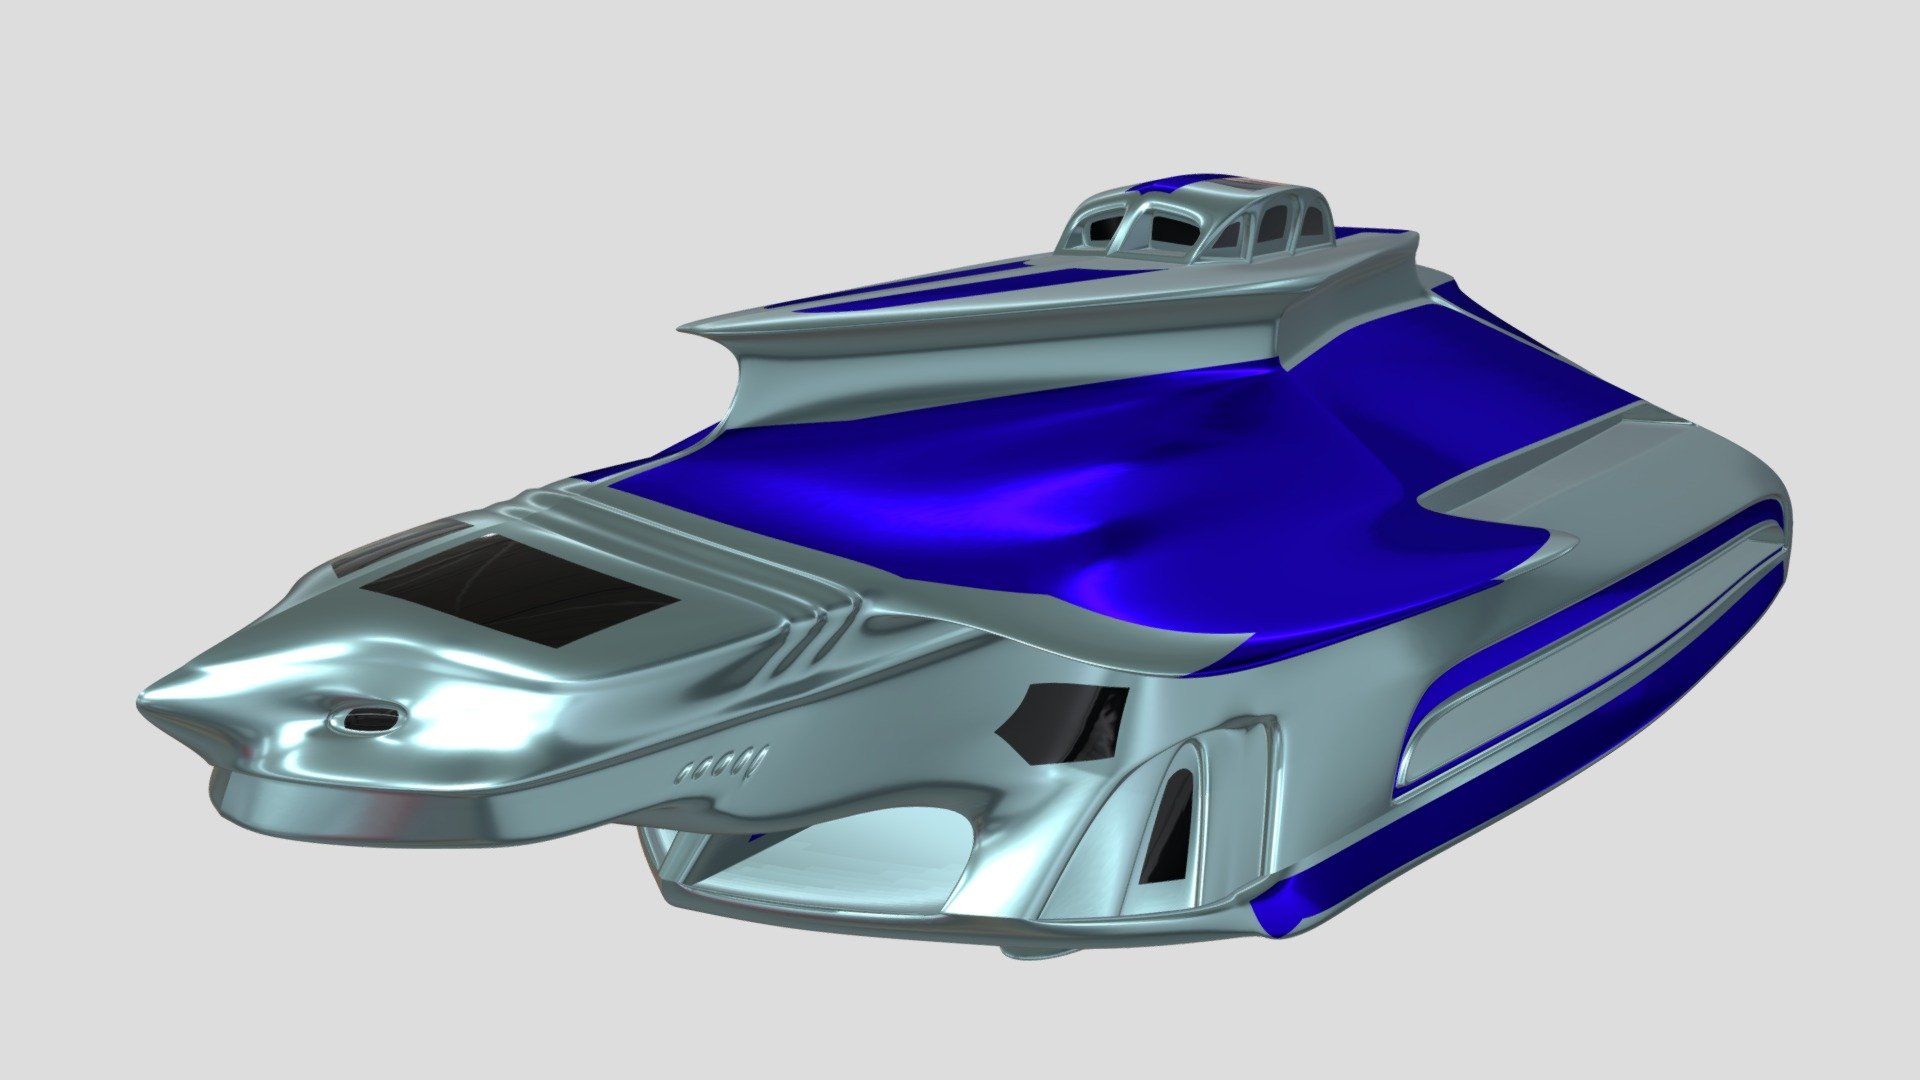 Sci Fi cruise ship style spaceship. Blender 3.0.
Kinda shark shaped.
Subdivision Modifier on 4 subdivisions . 
Single Mesh, 3 materials applied to polys, no texture map needed.
162,528 faces - Sci-Fi Cruise Ship - Download Free 3D model by d-alien (@daleziemianski) 3d model